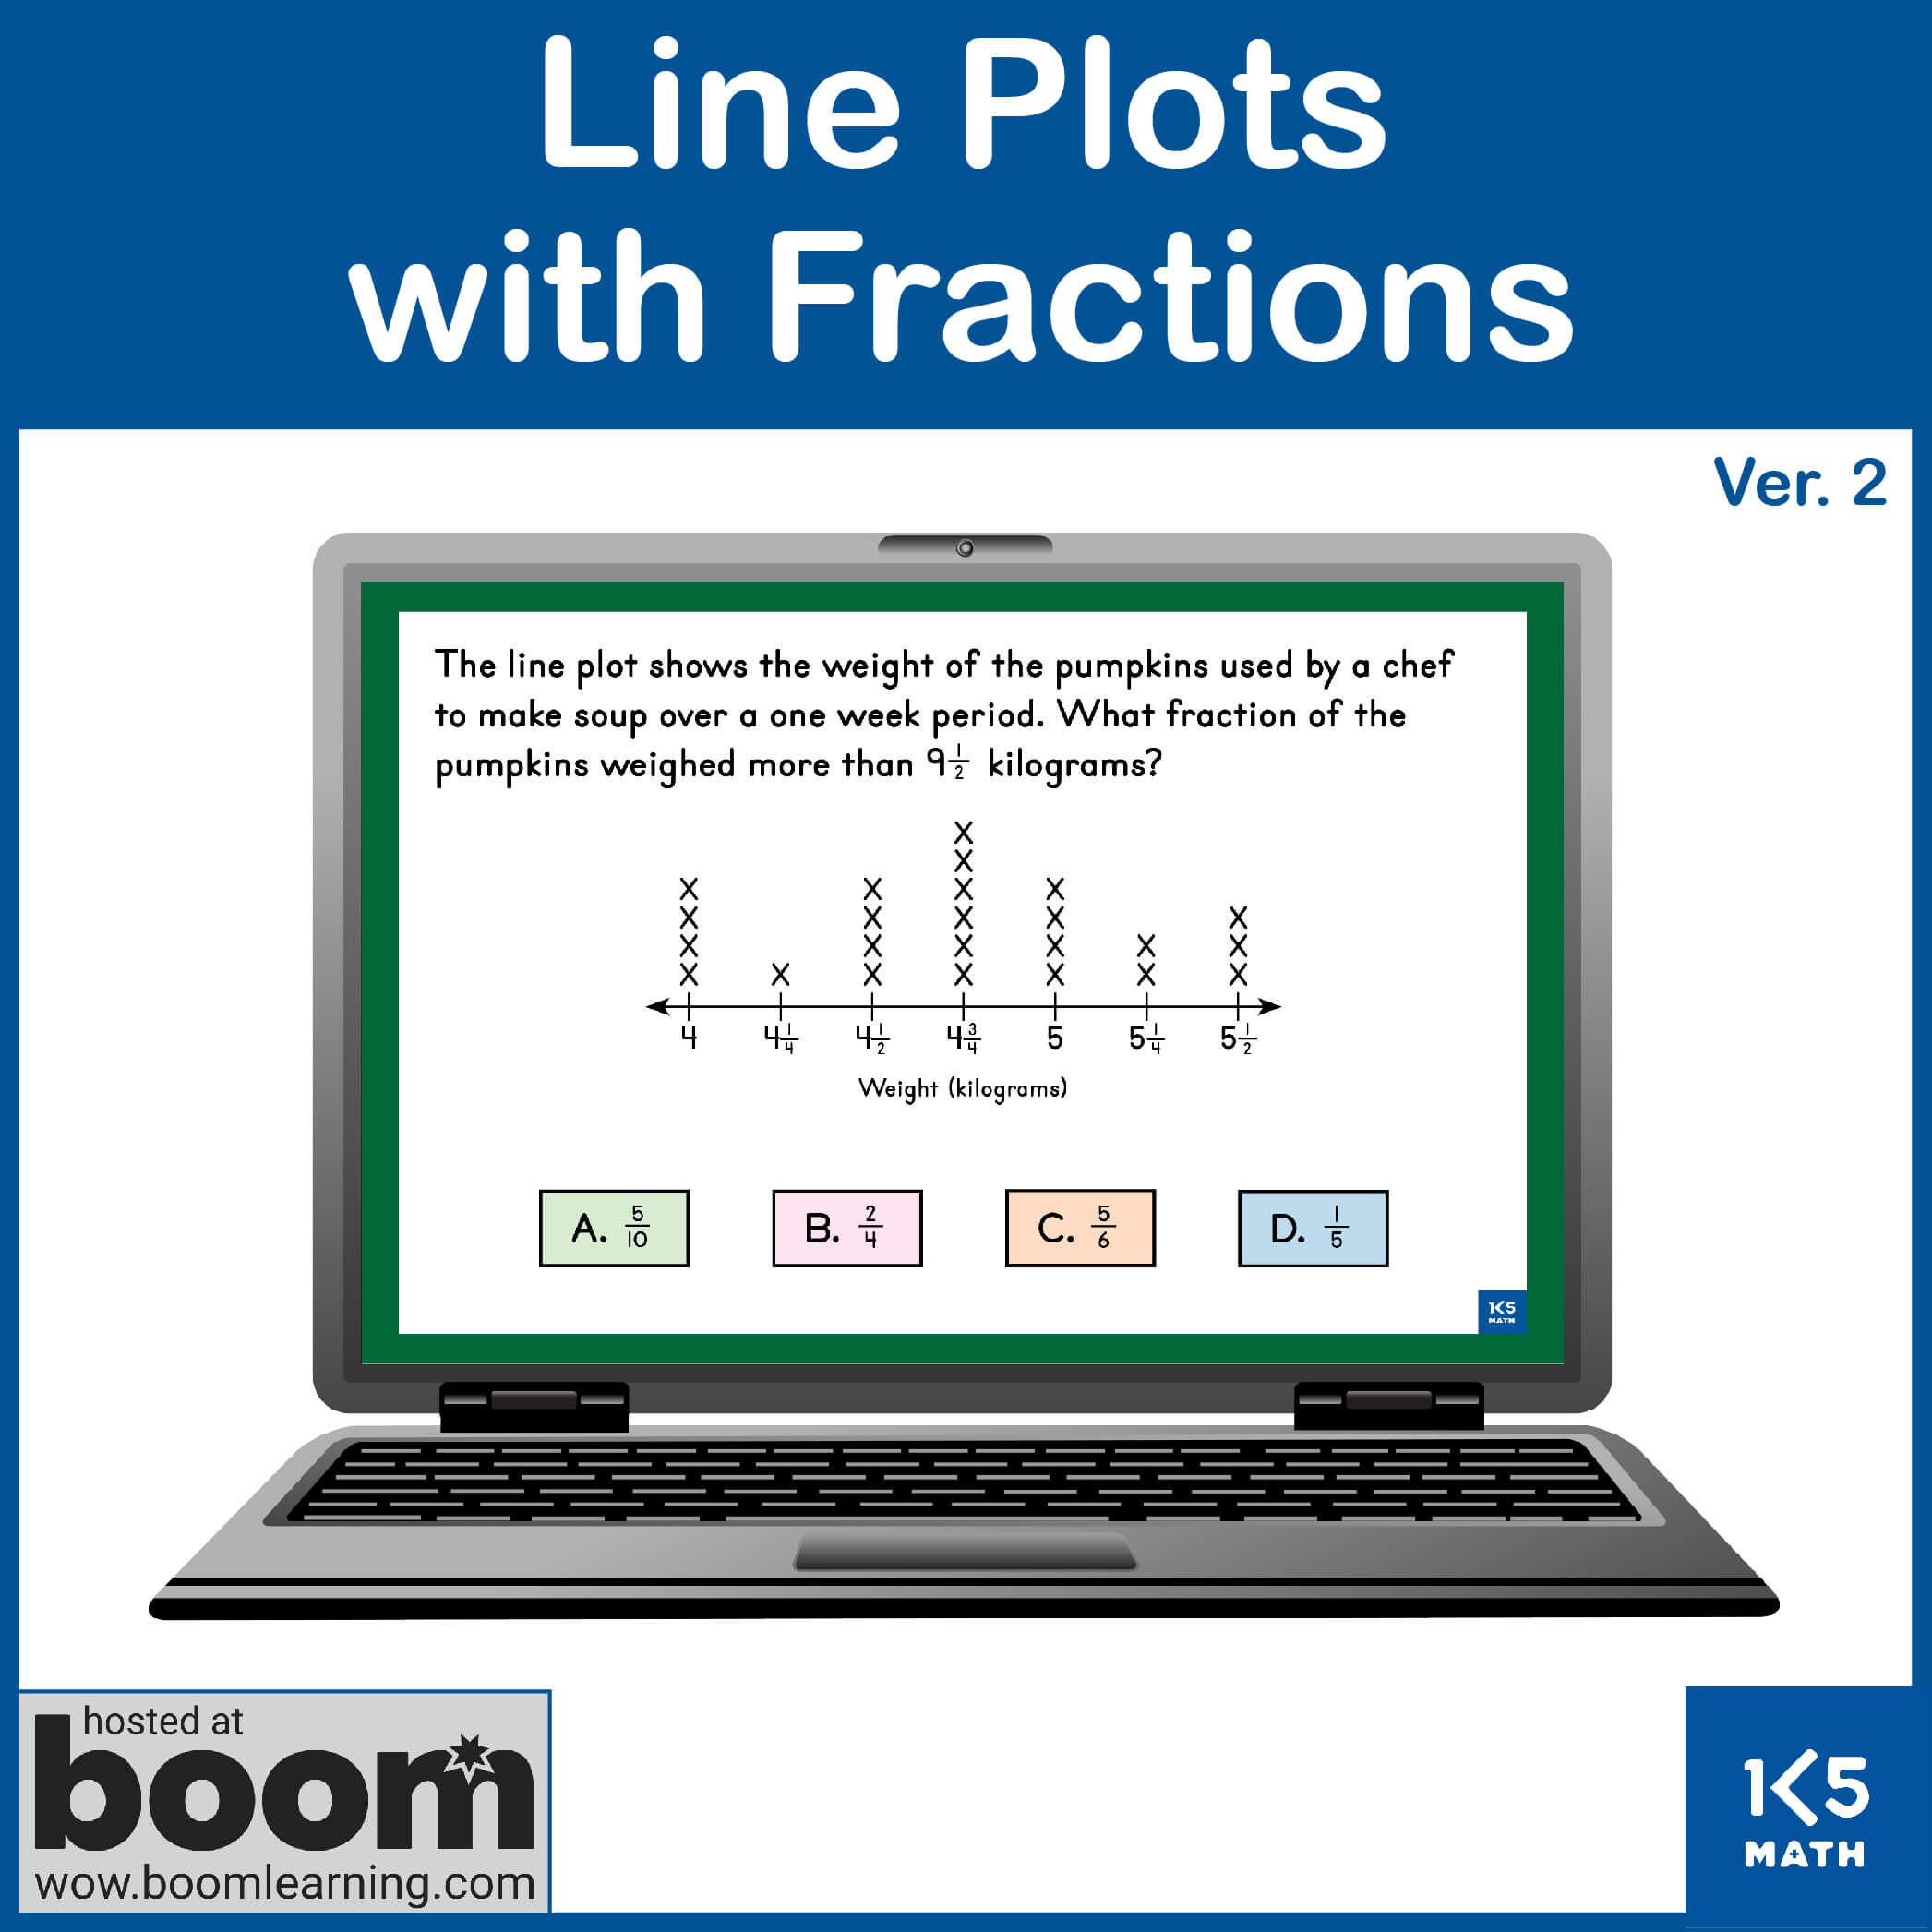 Boom Cards: Line Plots with Fractions ver. 2